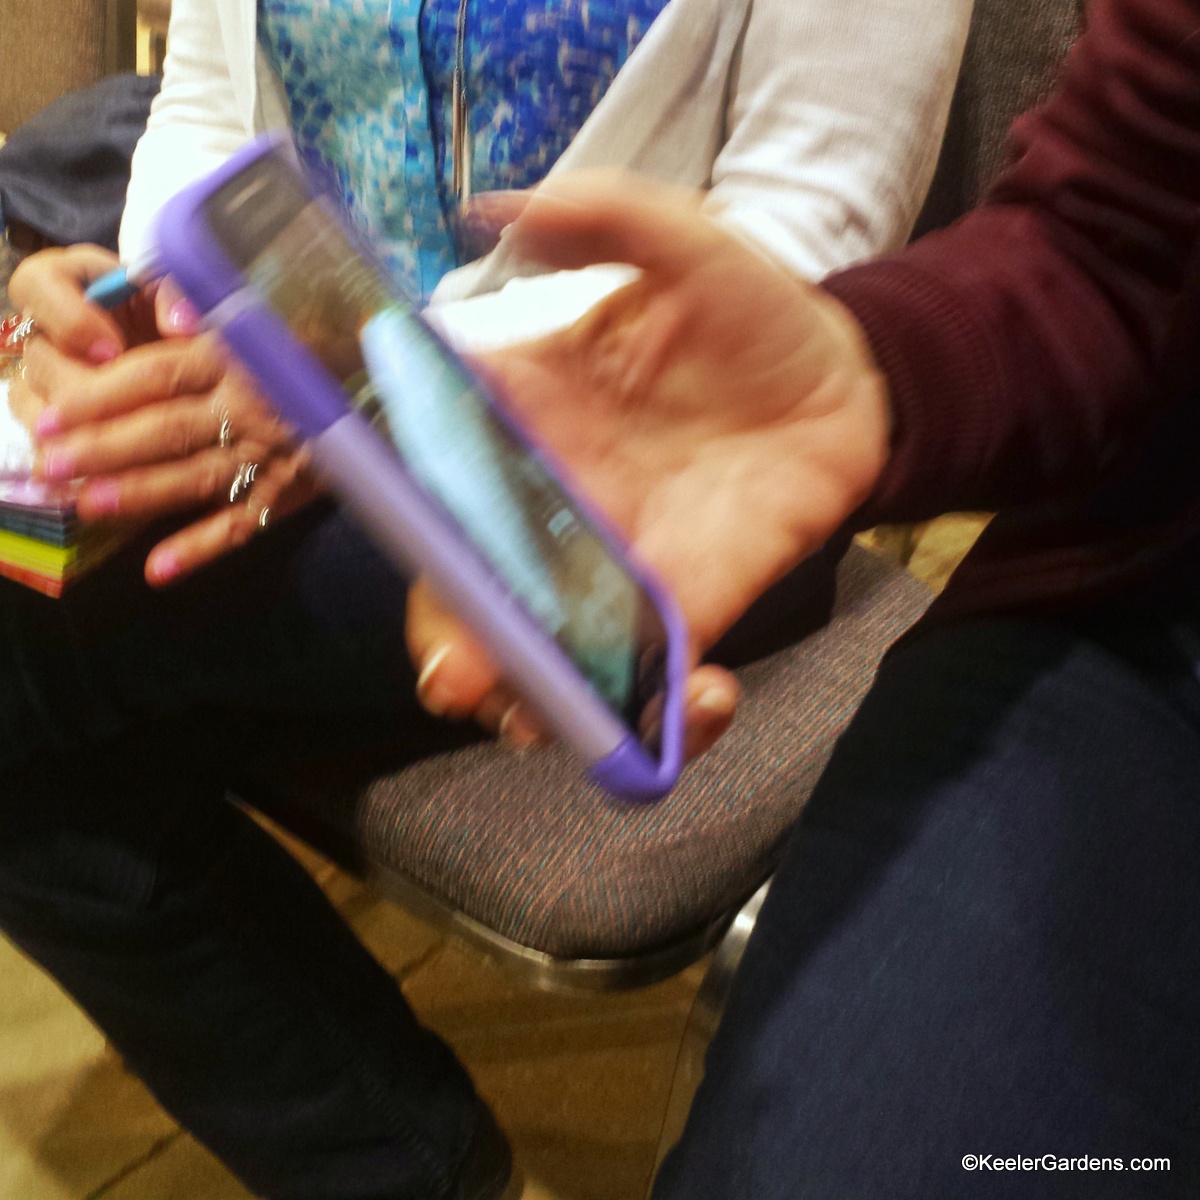 A student reviews the apps on her smart phone during a session on mobile photography. She appears to be eager to learn as her friend clasps her phone with some apprehension.